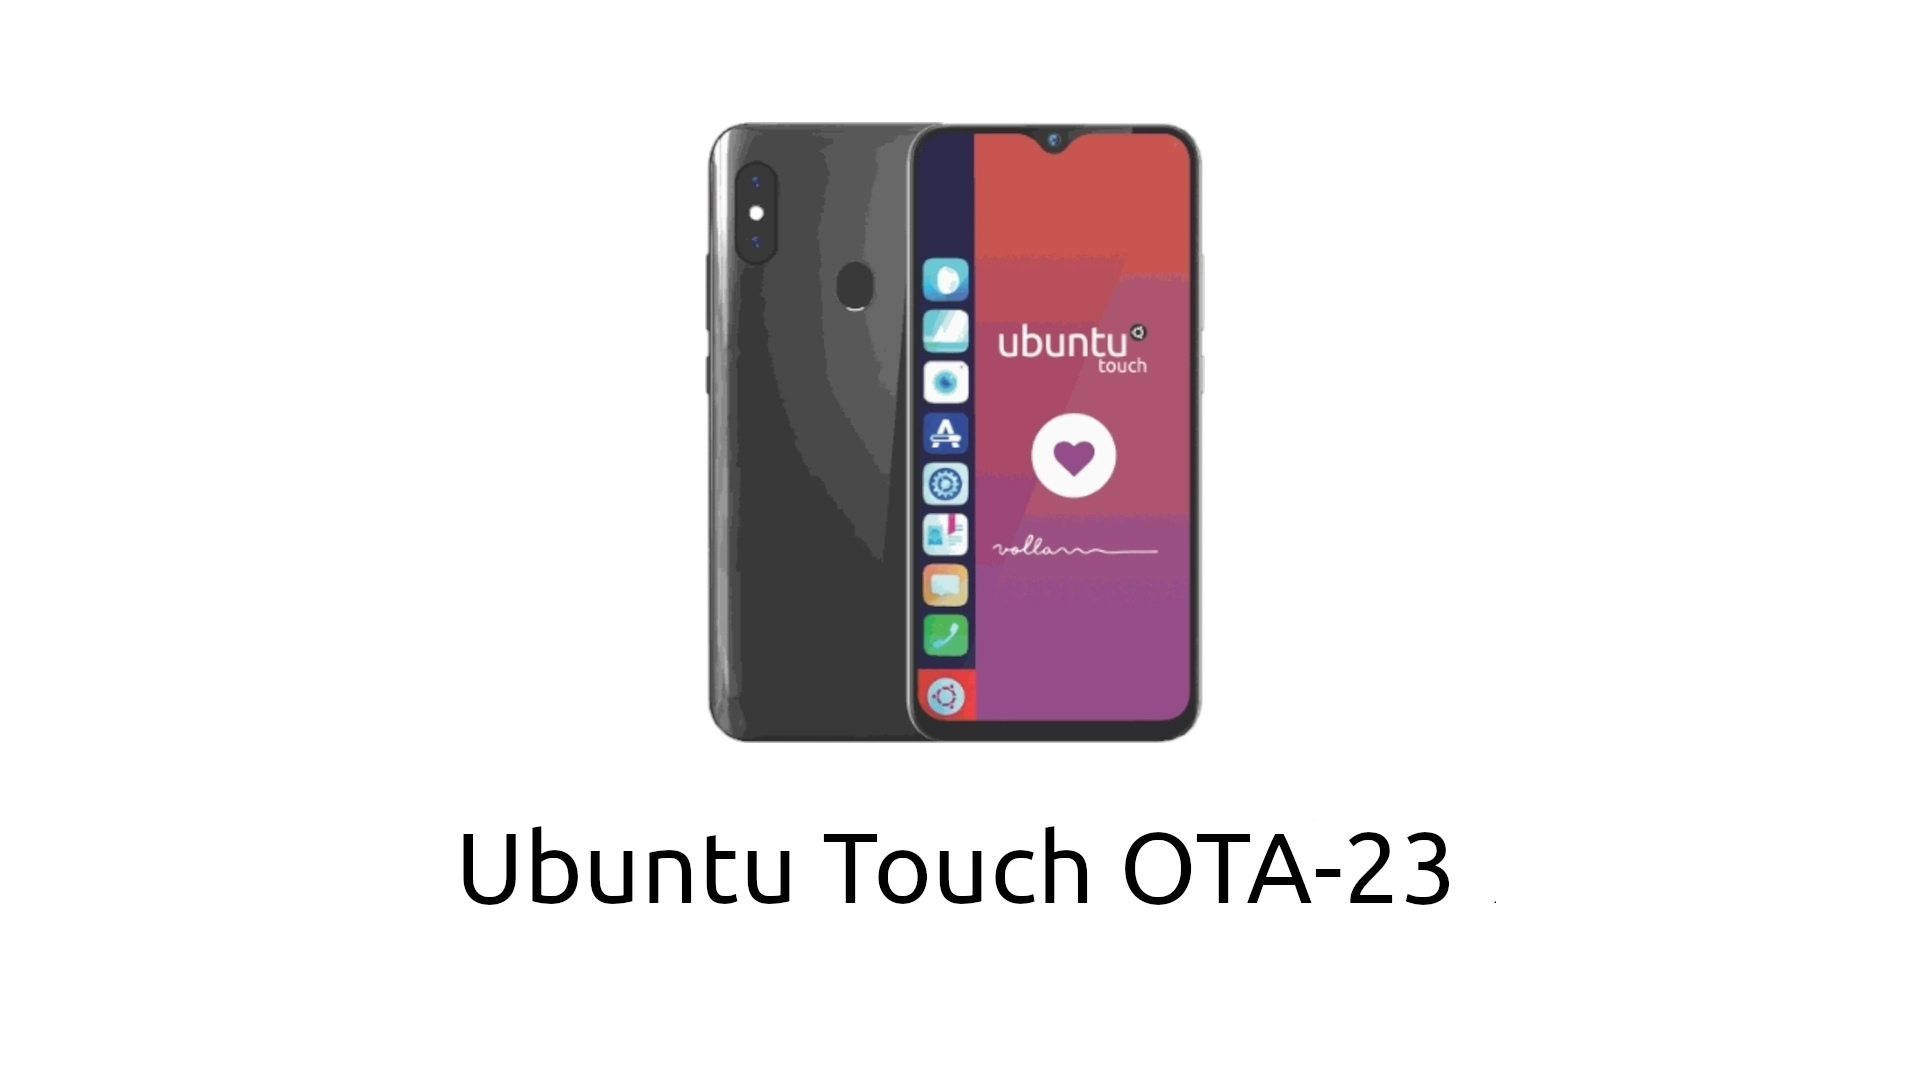 Ubuntu Touch OTA-23 Rolls Out to All Supported Ubuntu Phones, This is What’s New